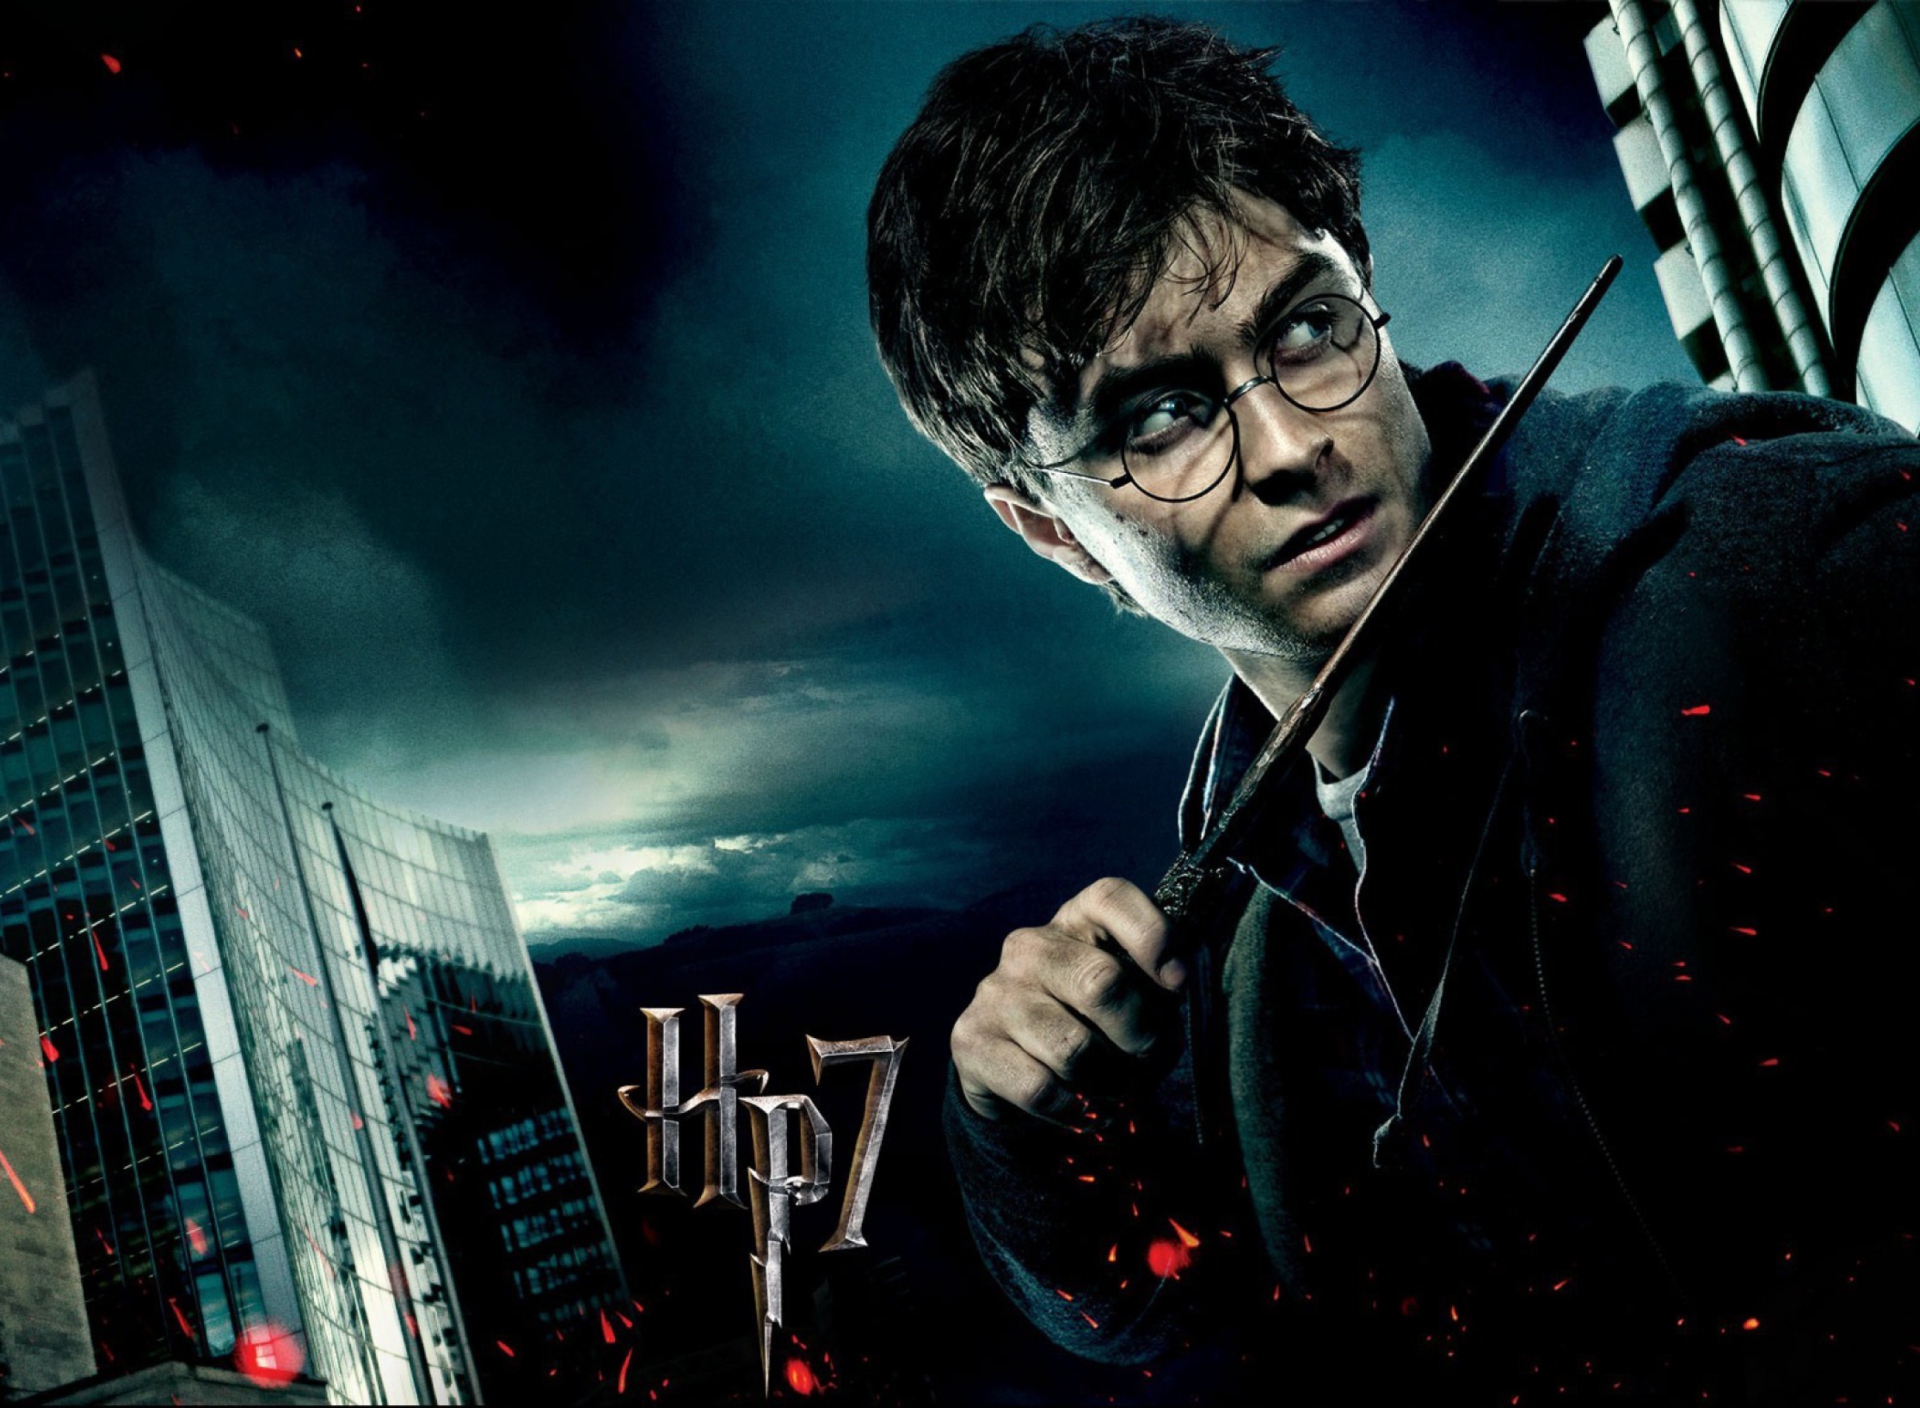 Sfondi Harry Potter And The Deathly Hallows Part-1 1920x1408